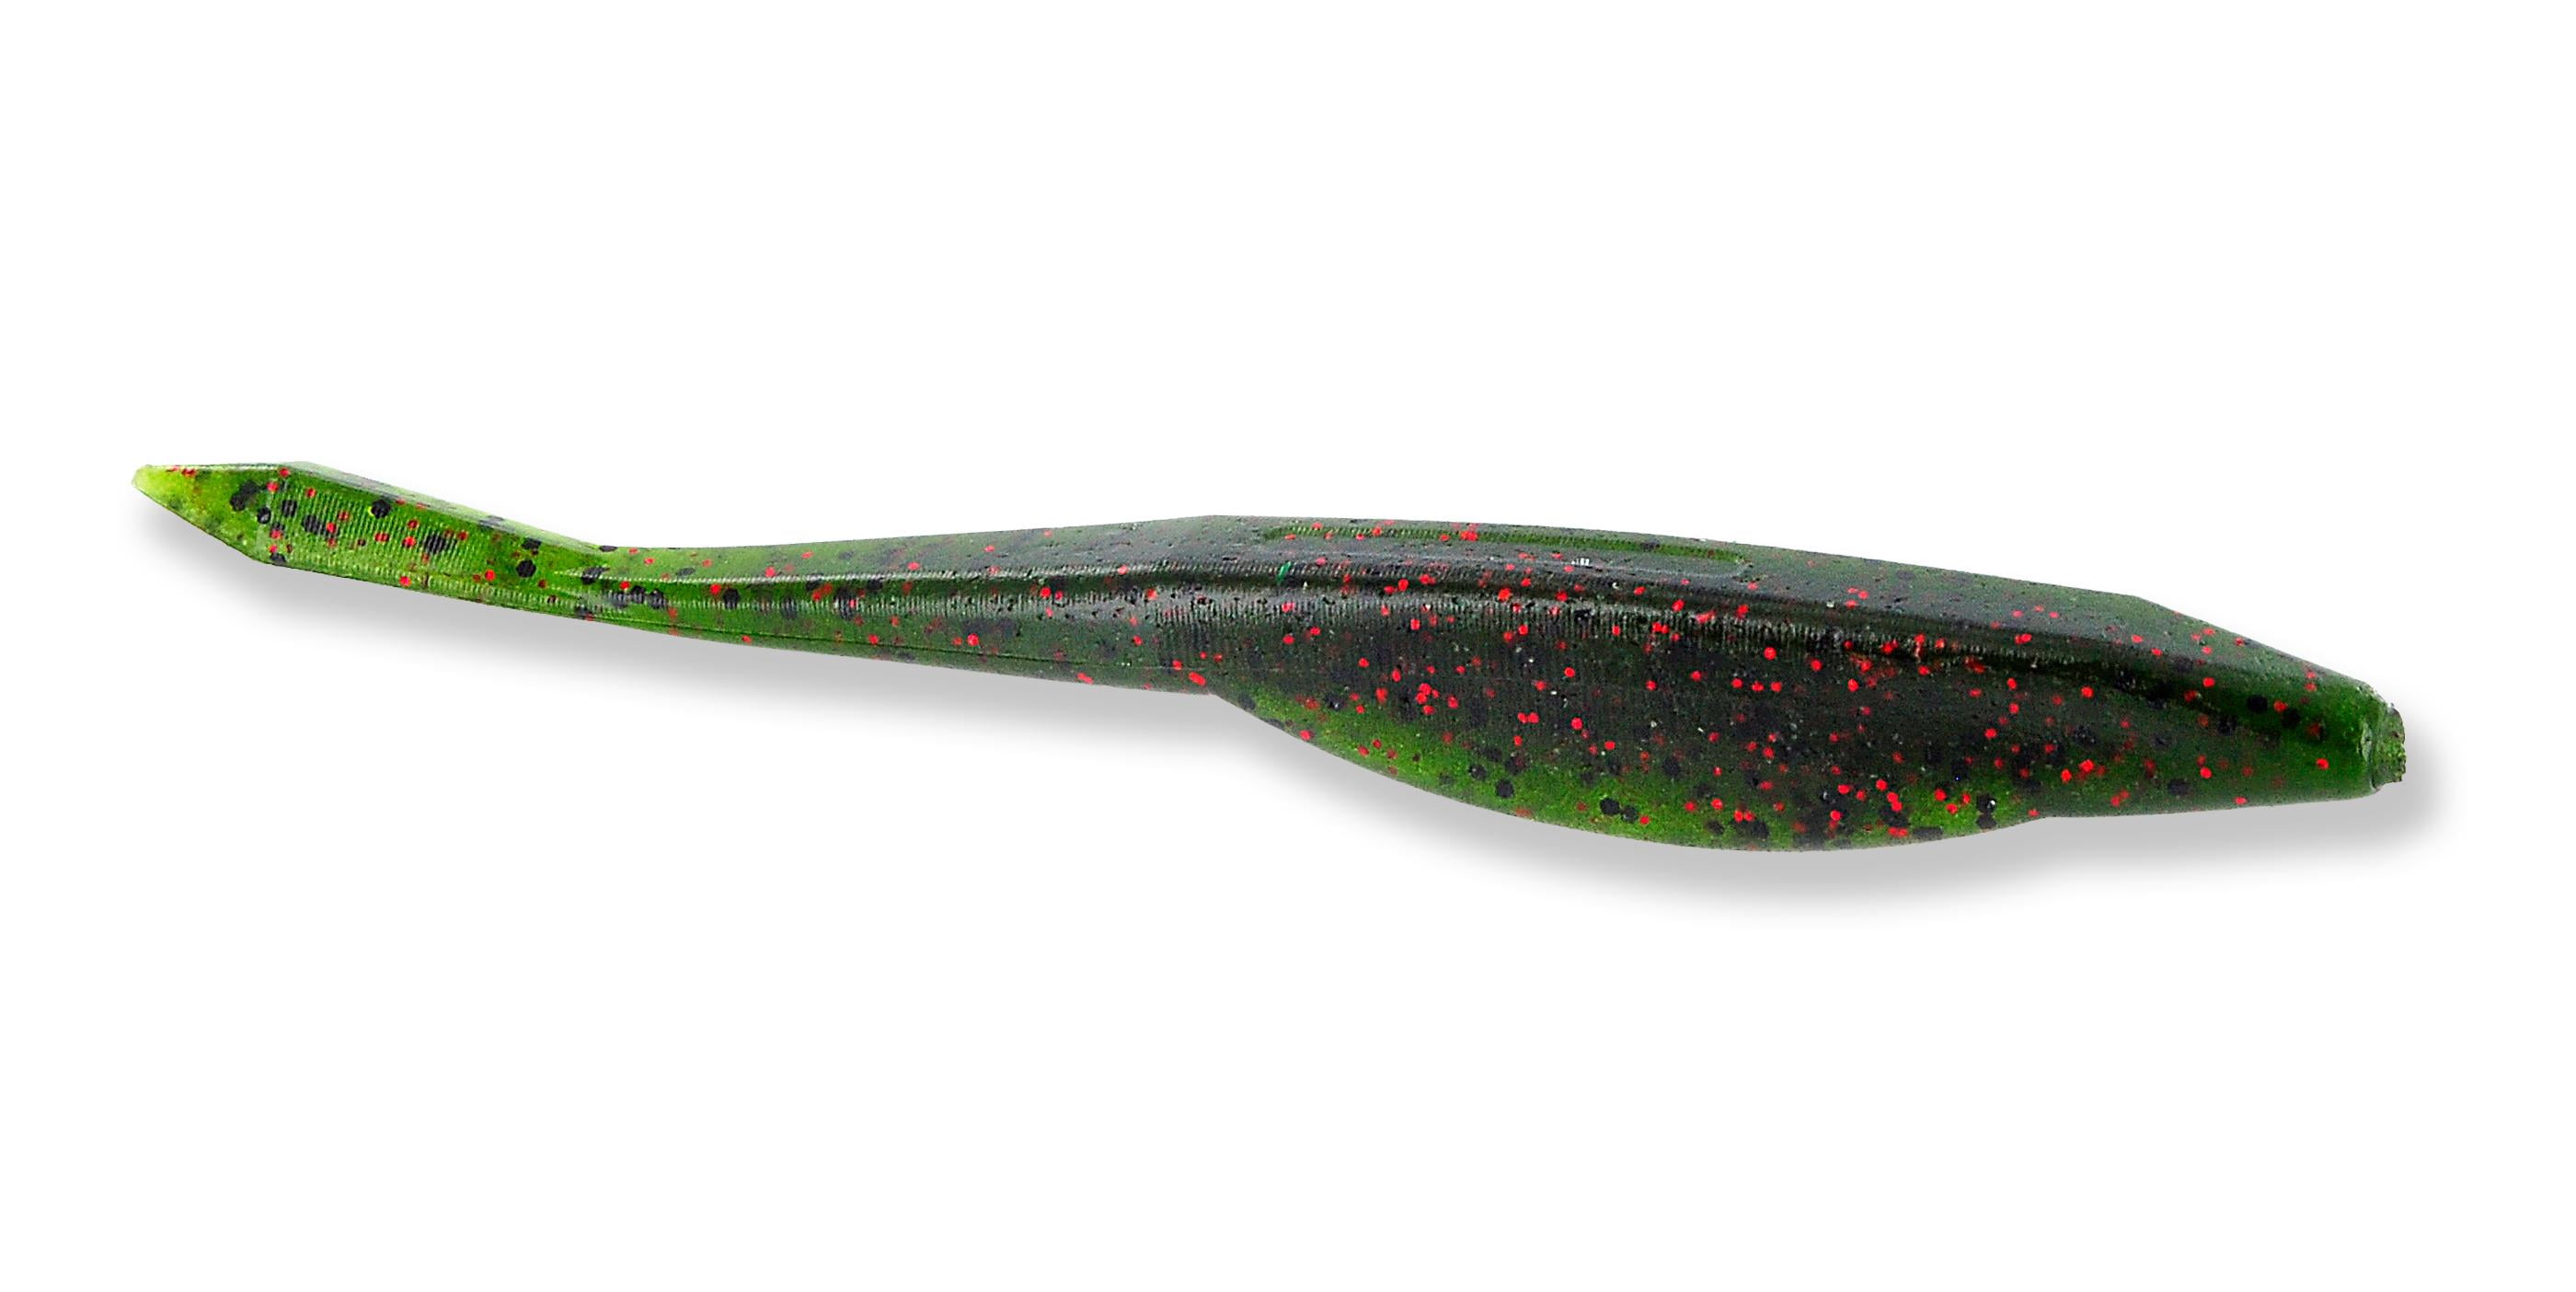 Jarrett Edwards Outdoors - Who fishes the Yamamoto Baits D Shad? This bait  cast along ways and has the perfect soft jerk bait action! I love how it  shimmies like a Senko